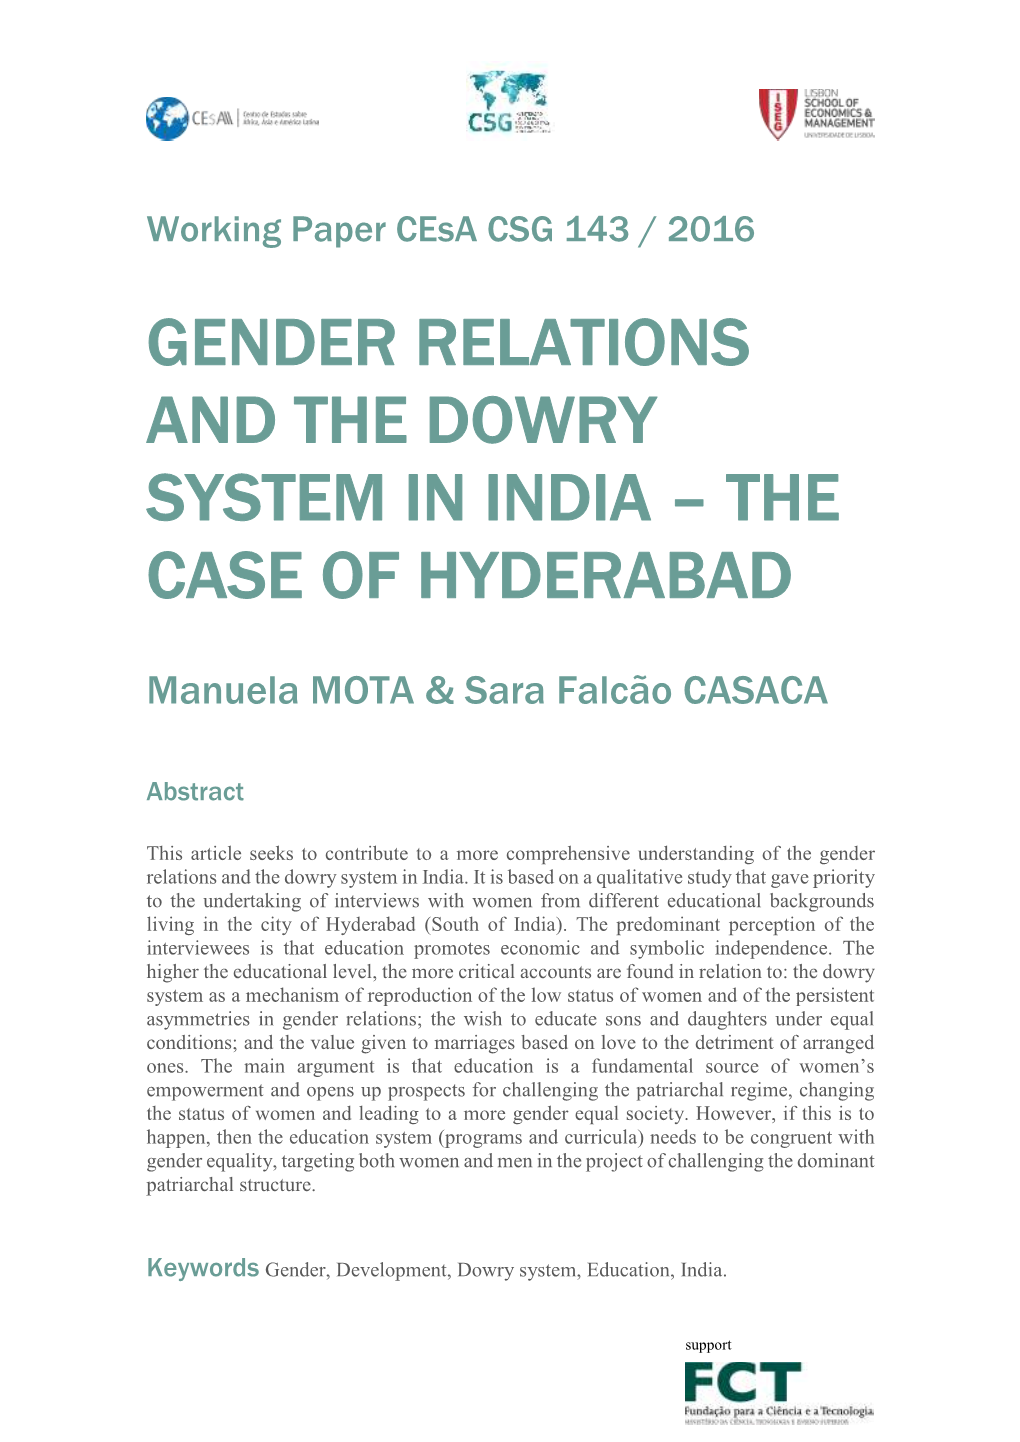 Gender Relations and the Dowry System in India – the Case of Hyderabad